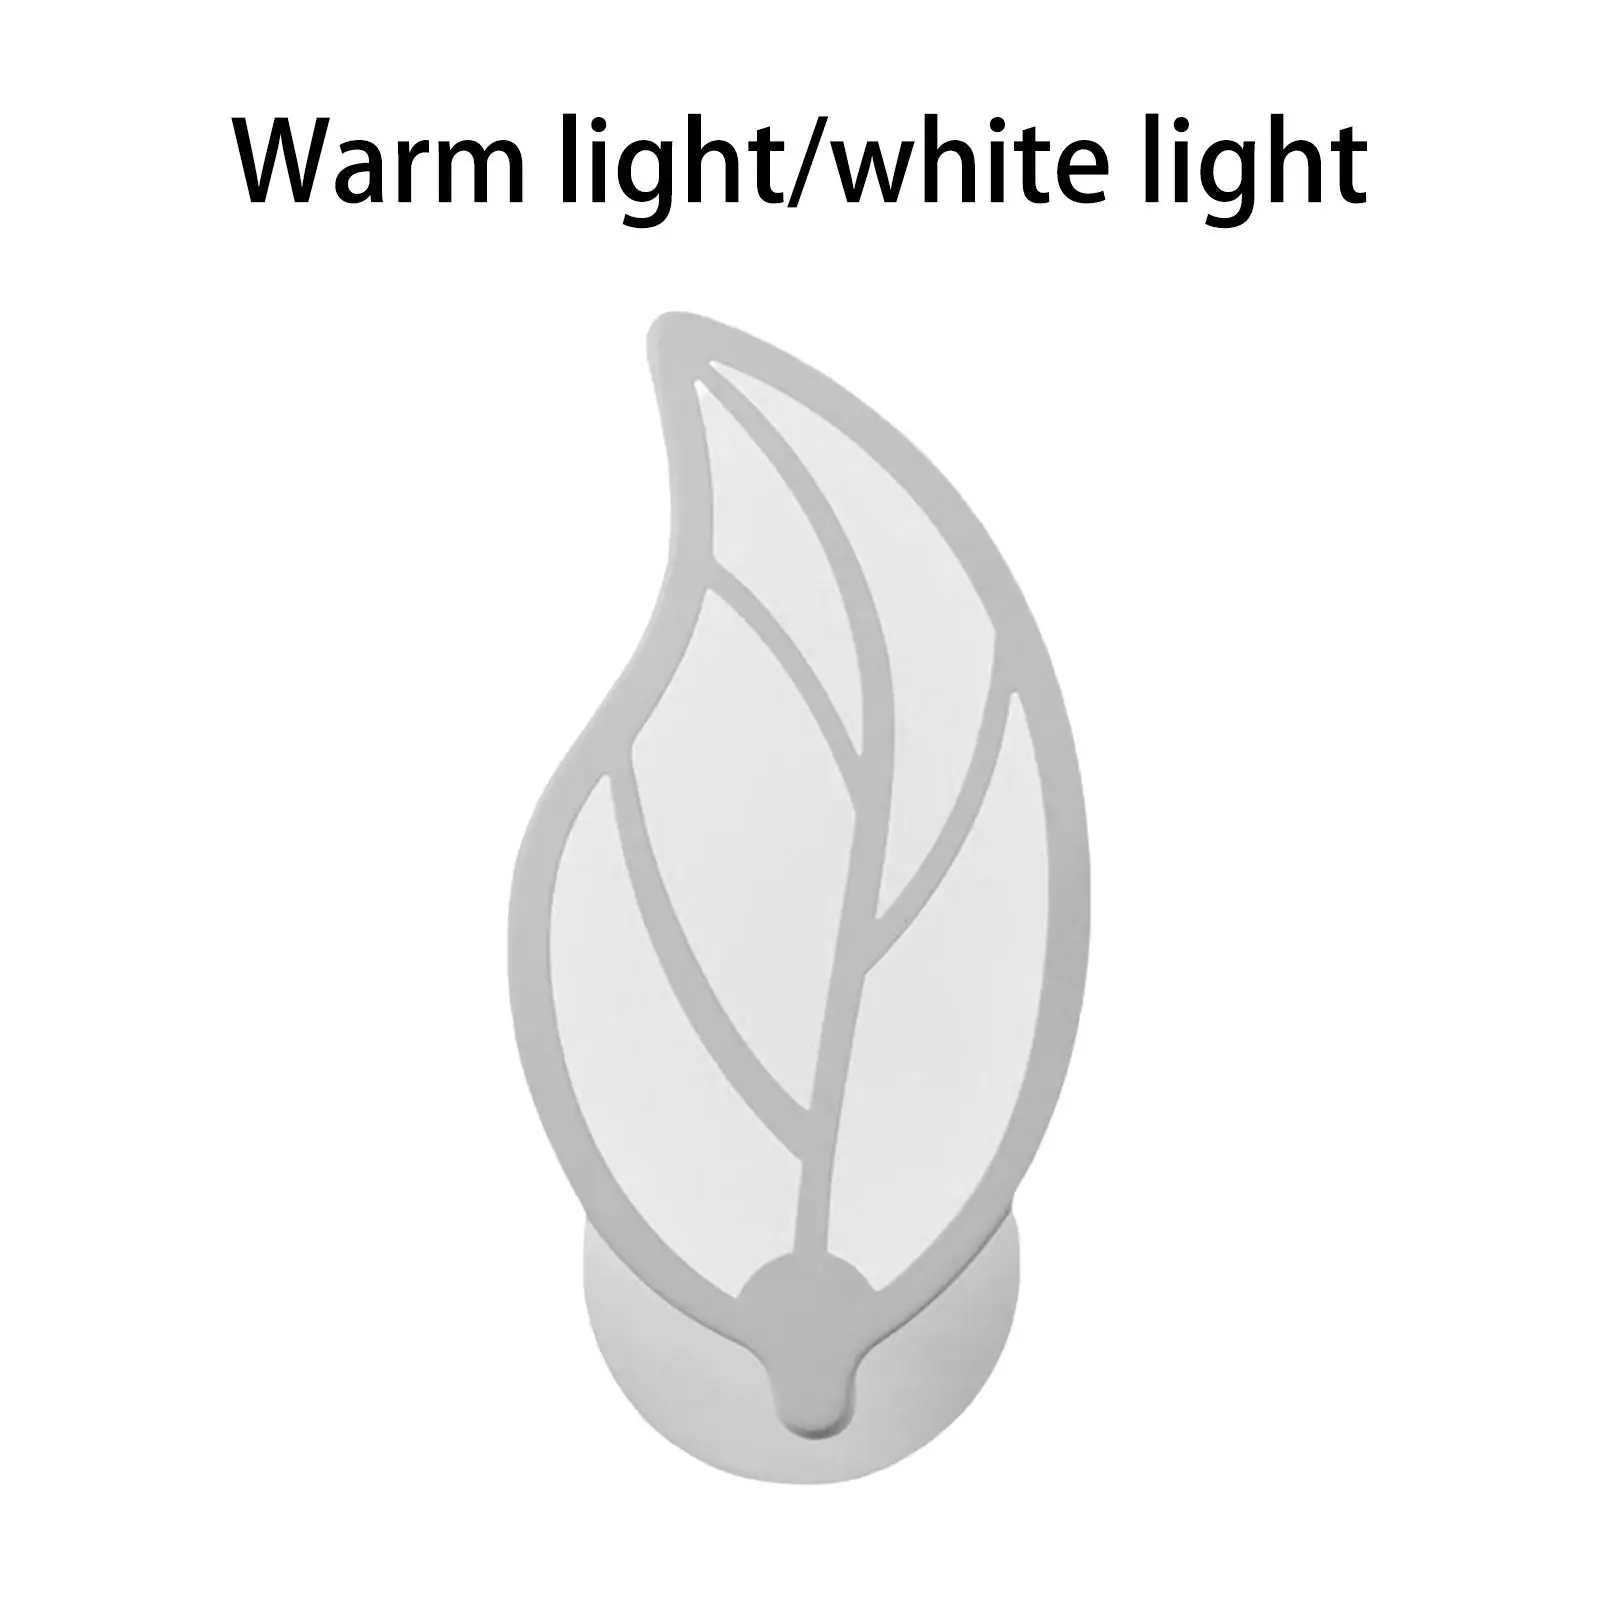 Nordic Wall Lamp Bedside Reading Light Wall Mounted Decorative Minimalist Wall Sconce for Corridor Hallway Bedroom Stair Decor